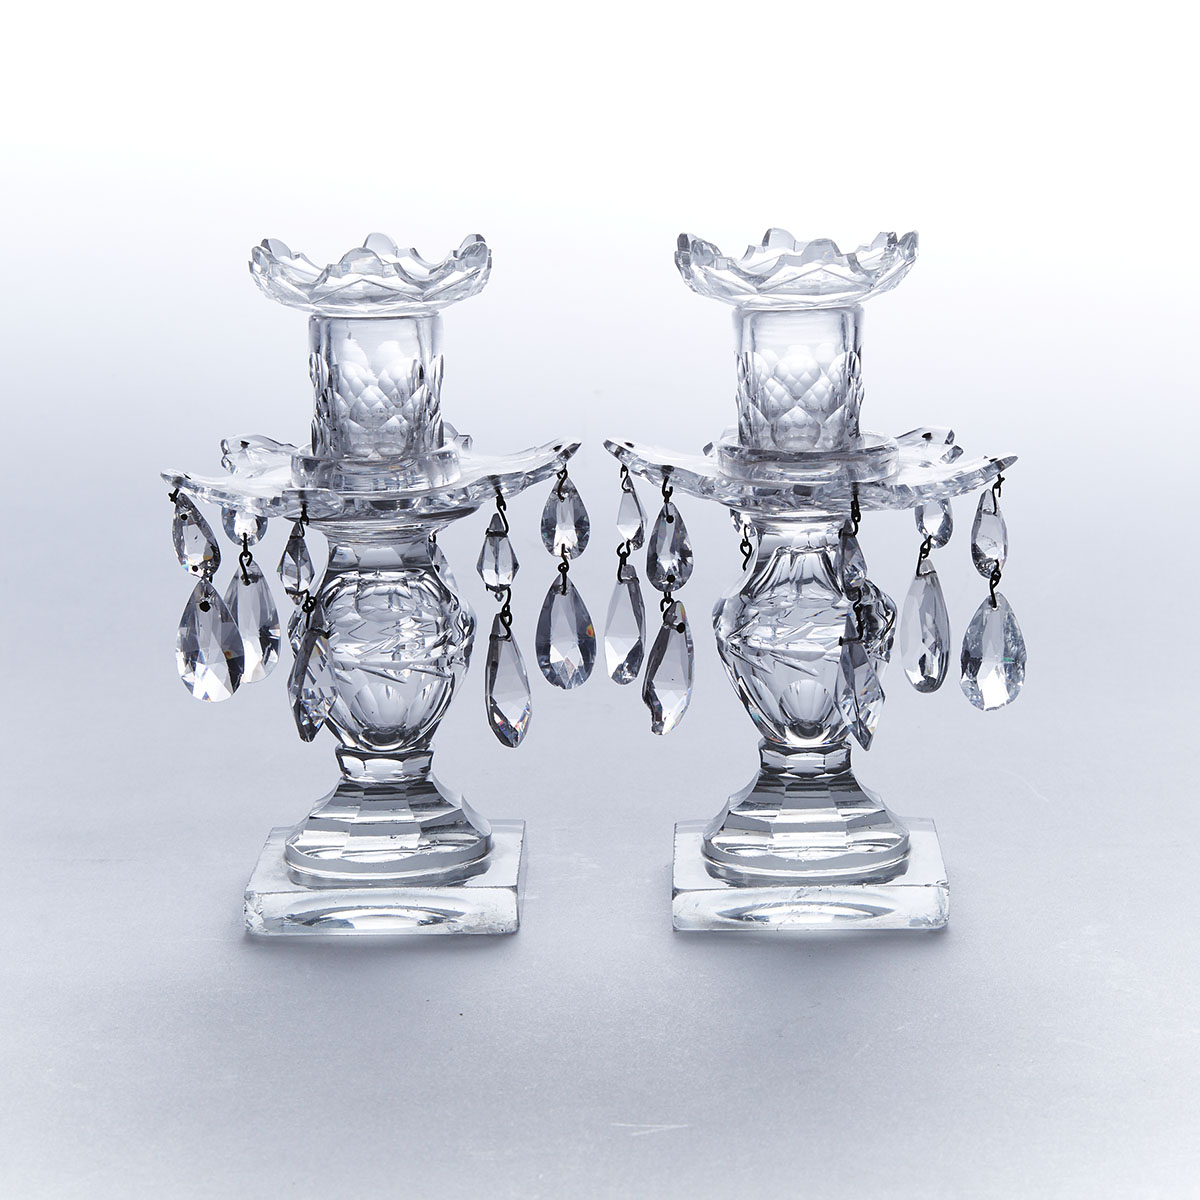 Pair of Anglo-Irish Cut Glass Candlestick Lustres, c.1800